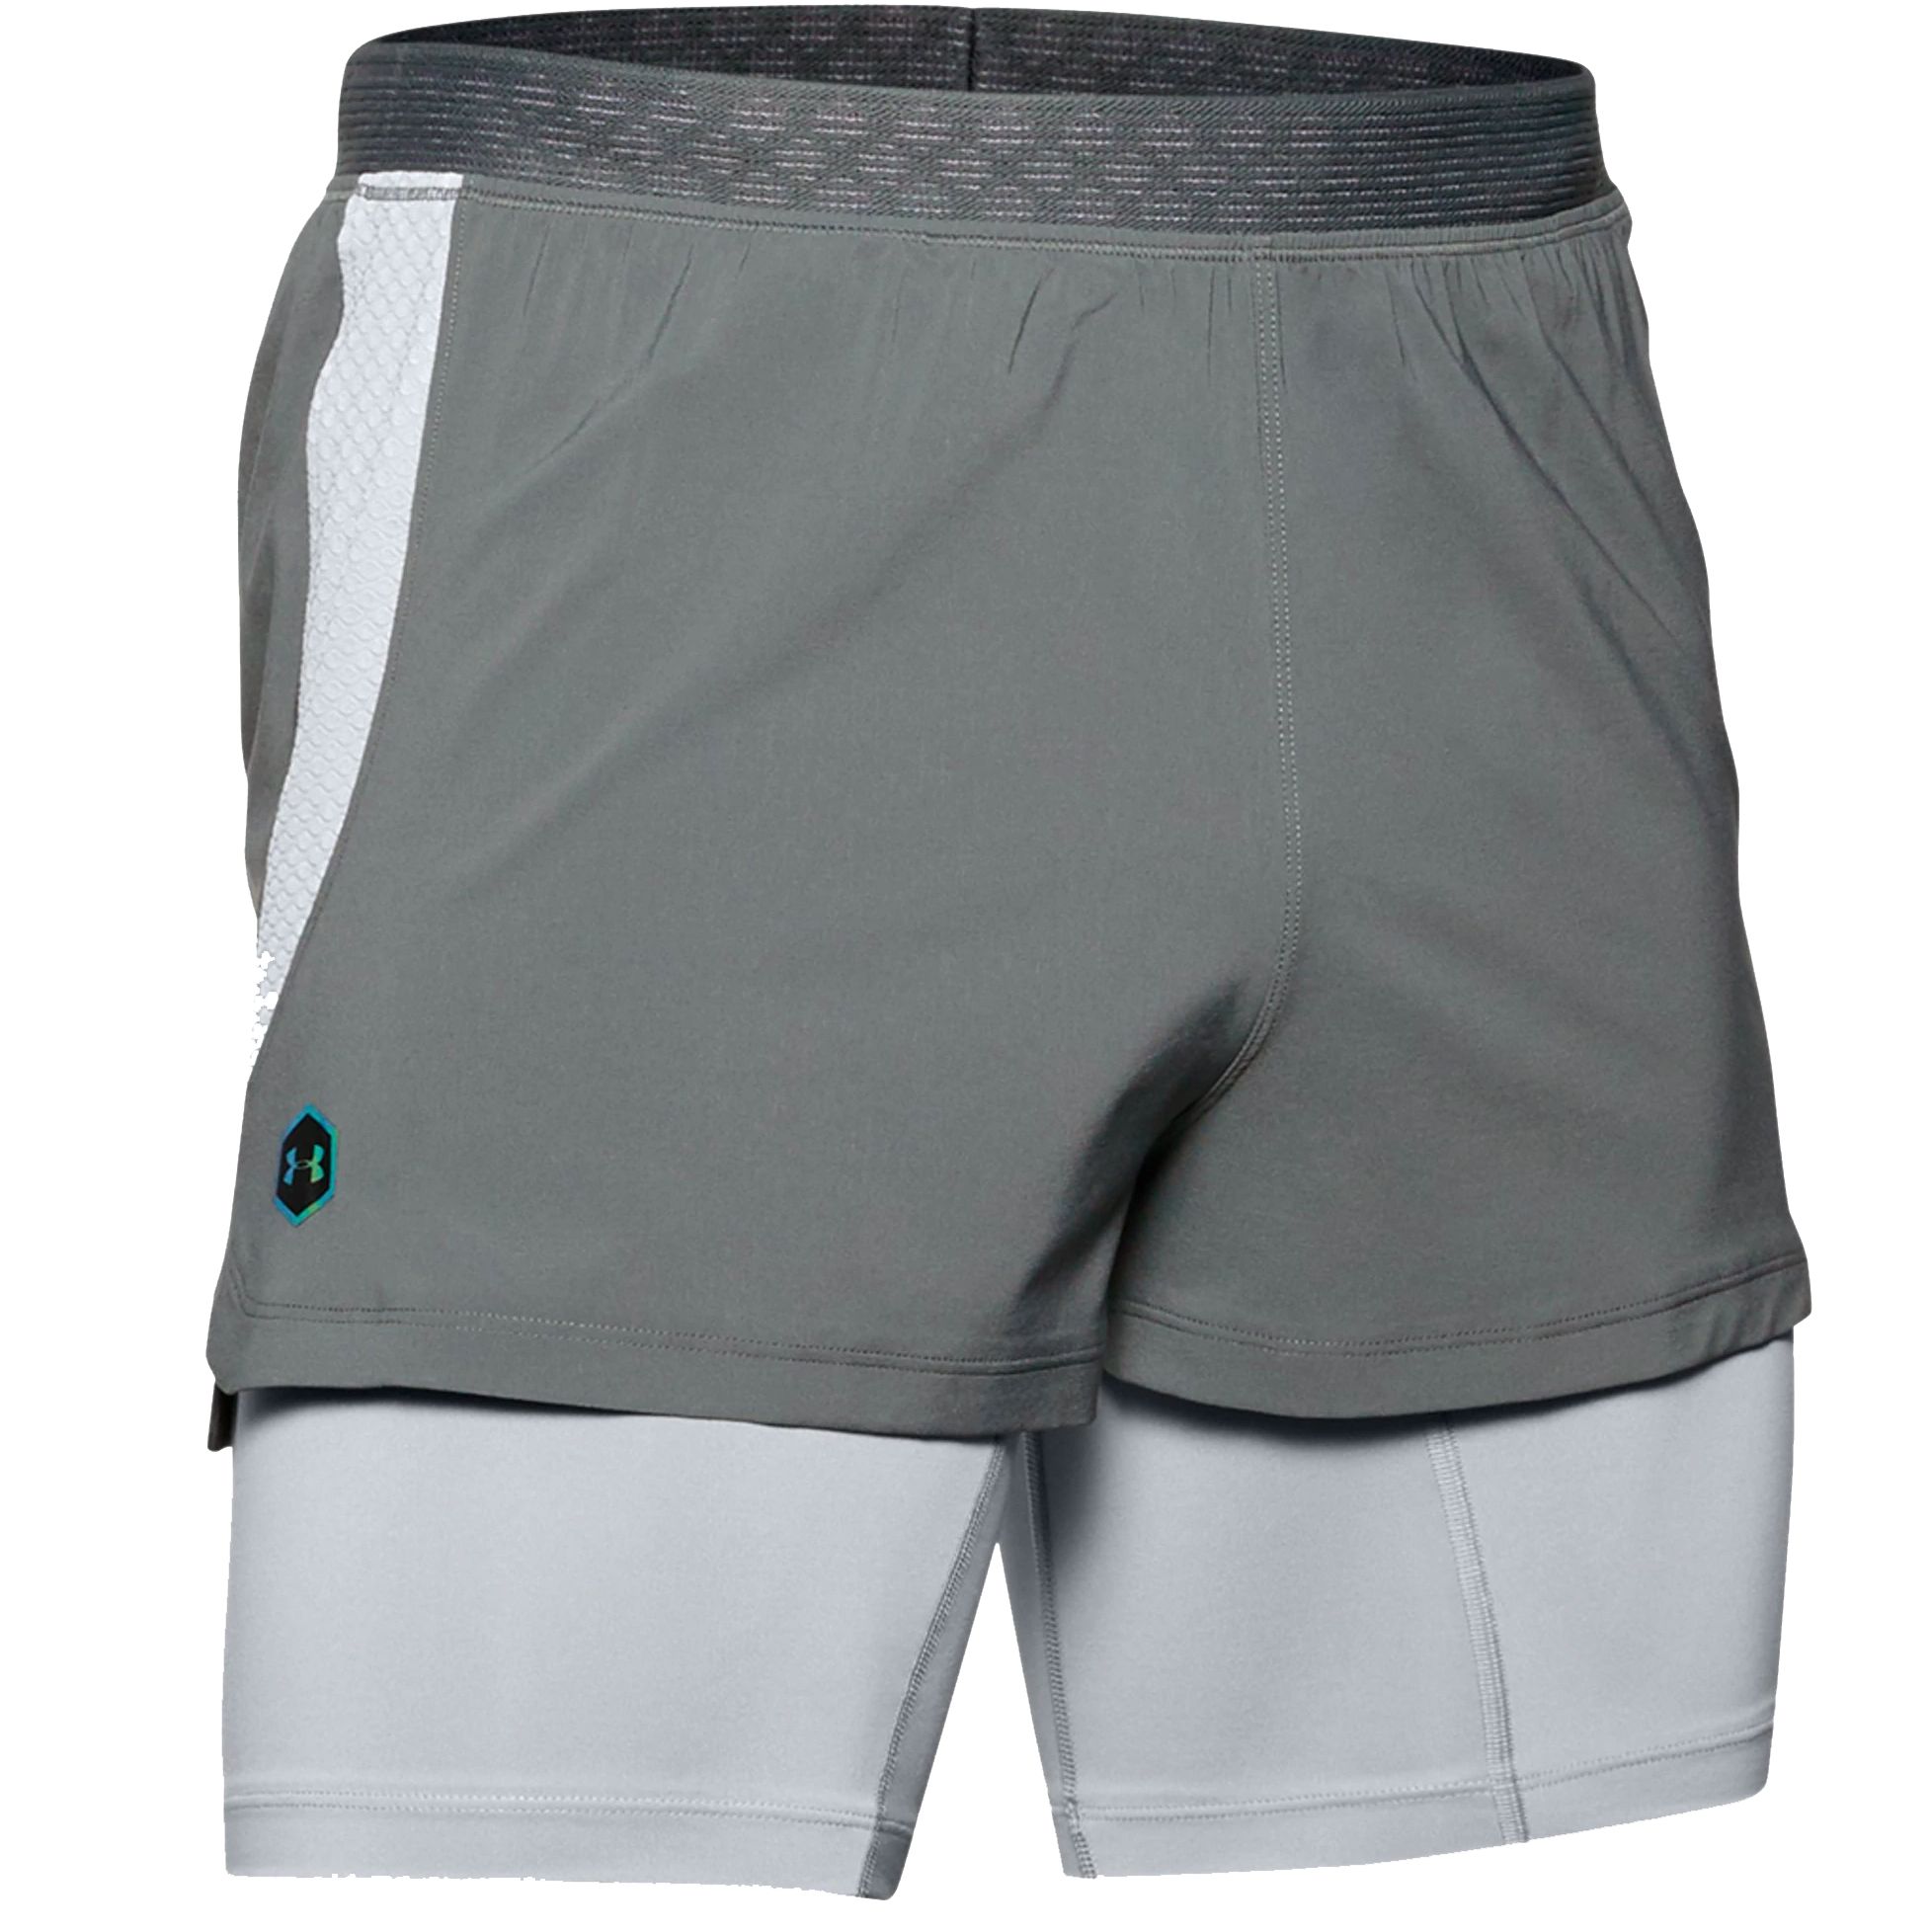 The best men's running shorts to buy as 